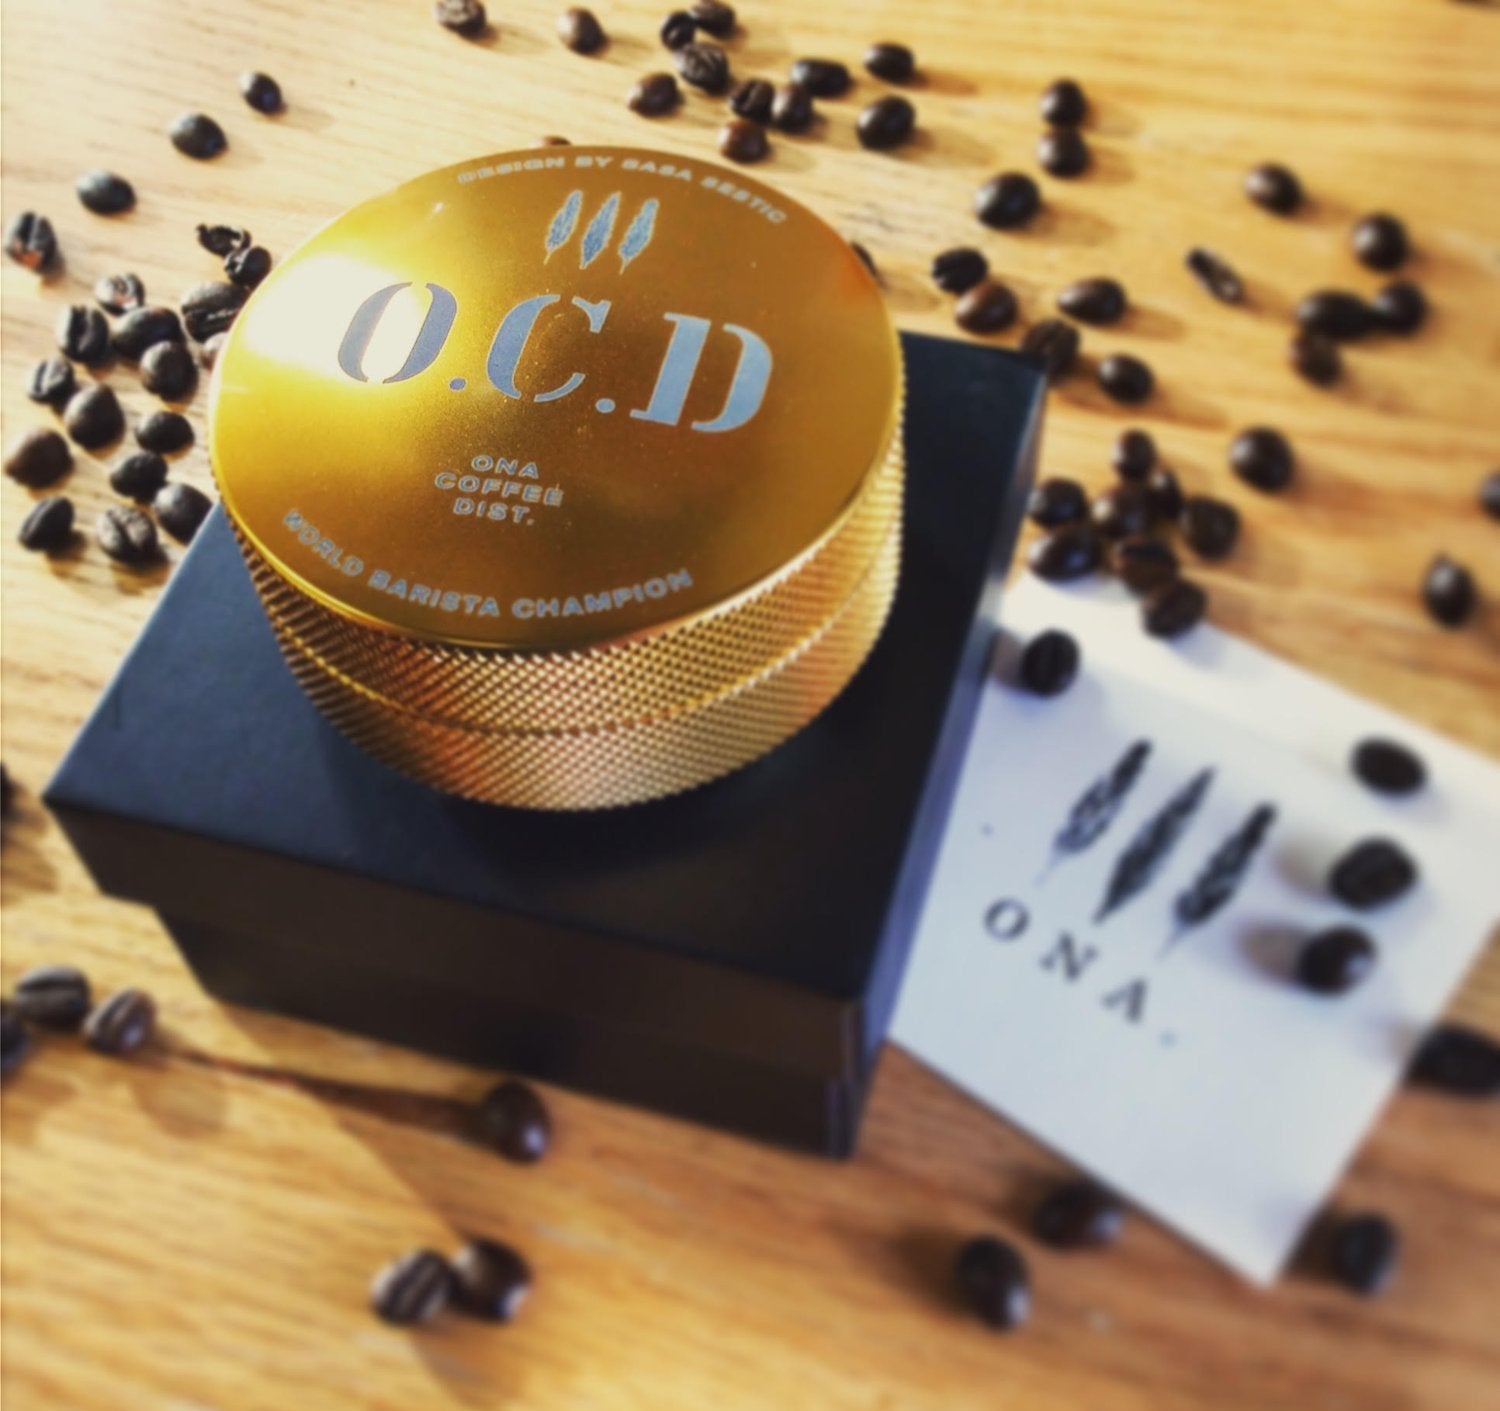 OCD v2 – The Next Generation in Perfect Coffee Distribution